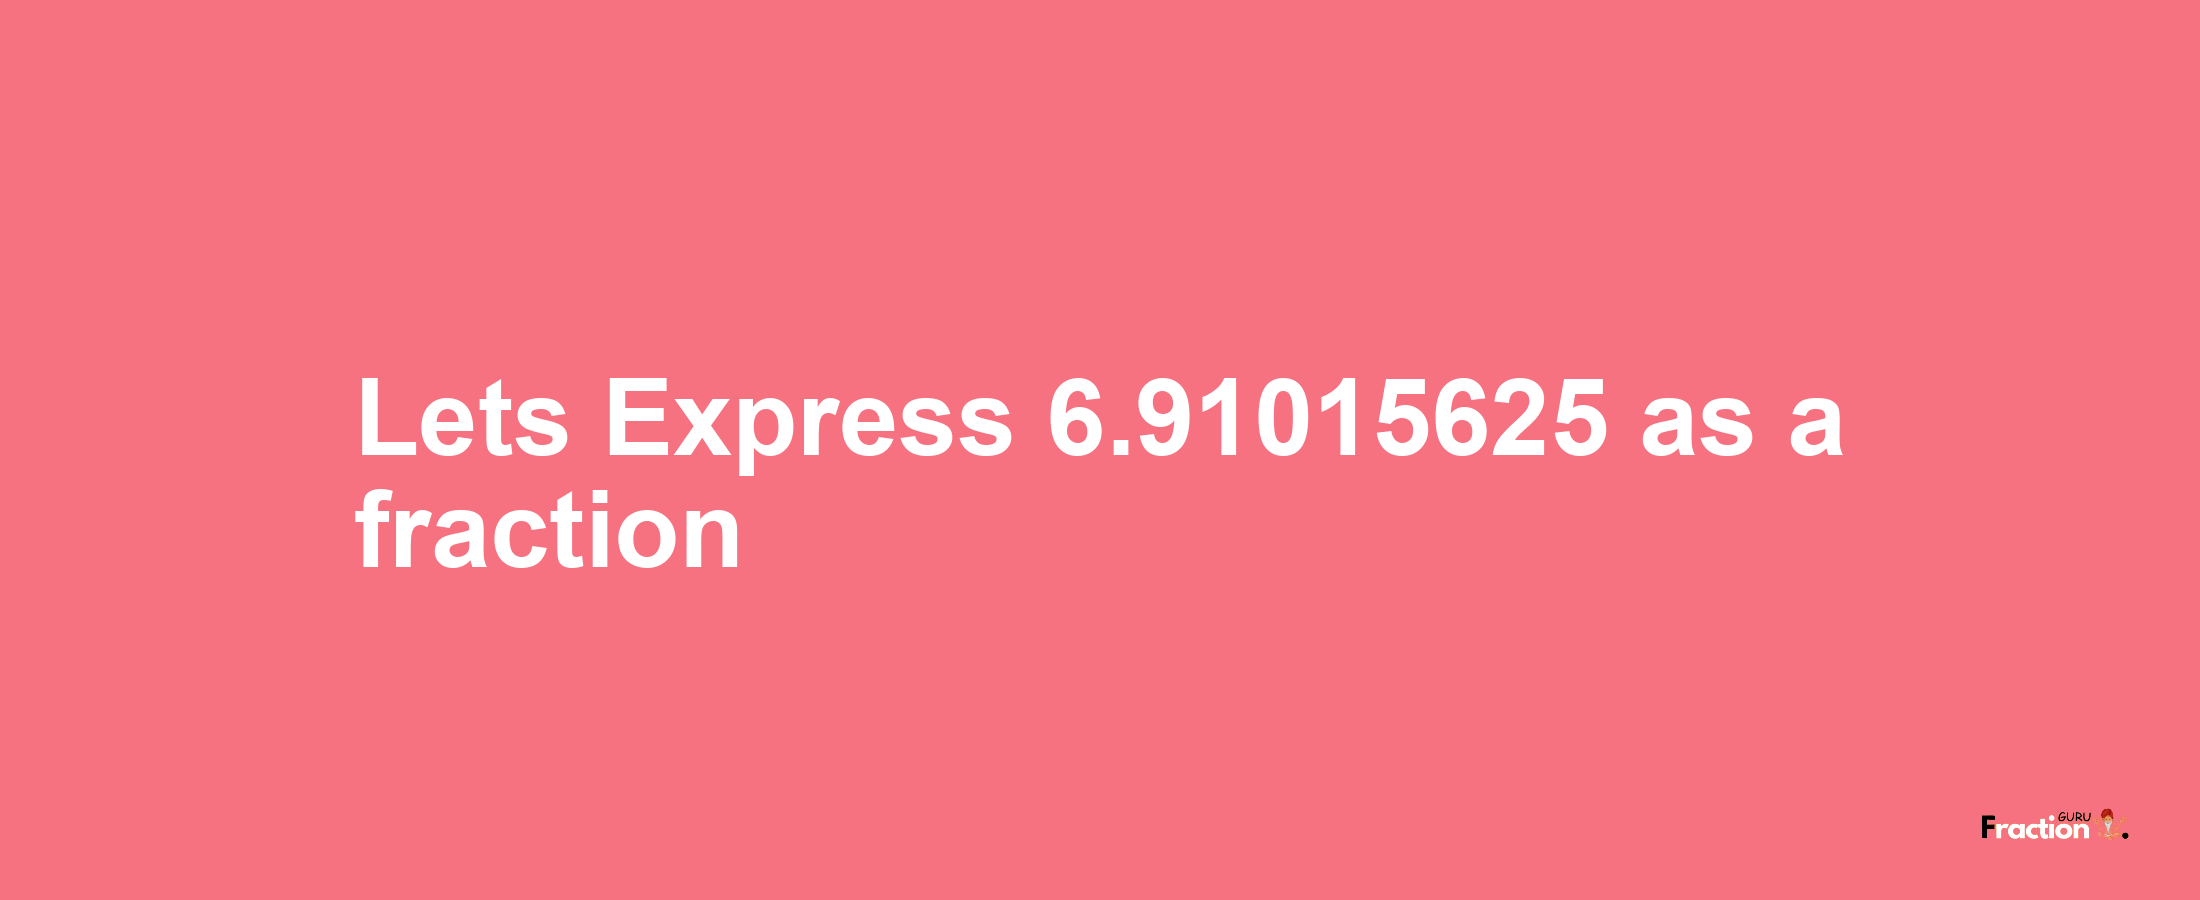 Lets Express 6.91015625 as afraction